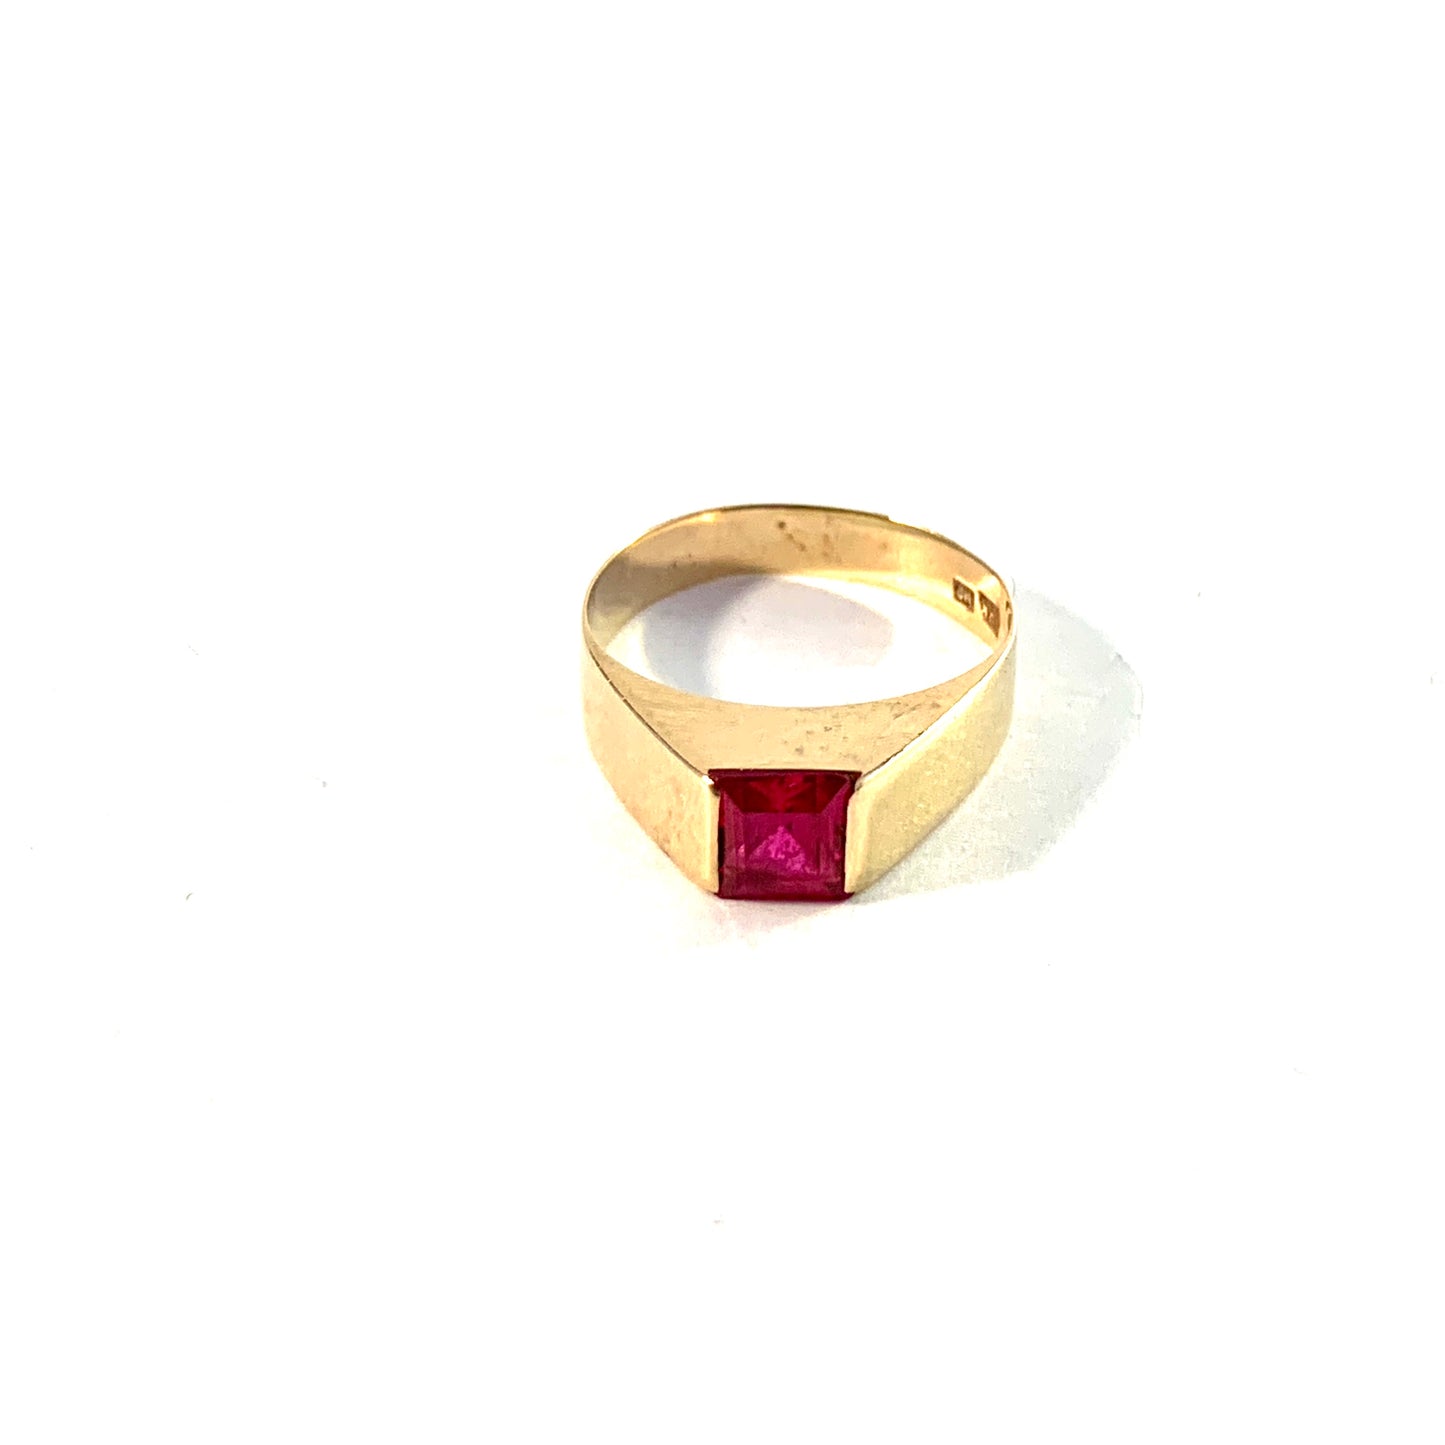 Johan Petersson, Sweden 1958. Vintage 18k Gold Synthetic Pink Sapphire Ring